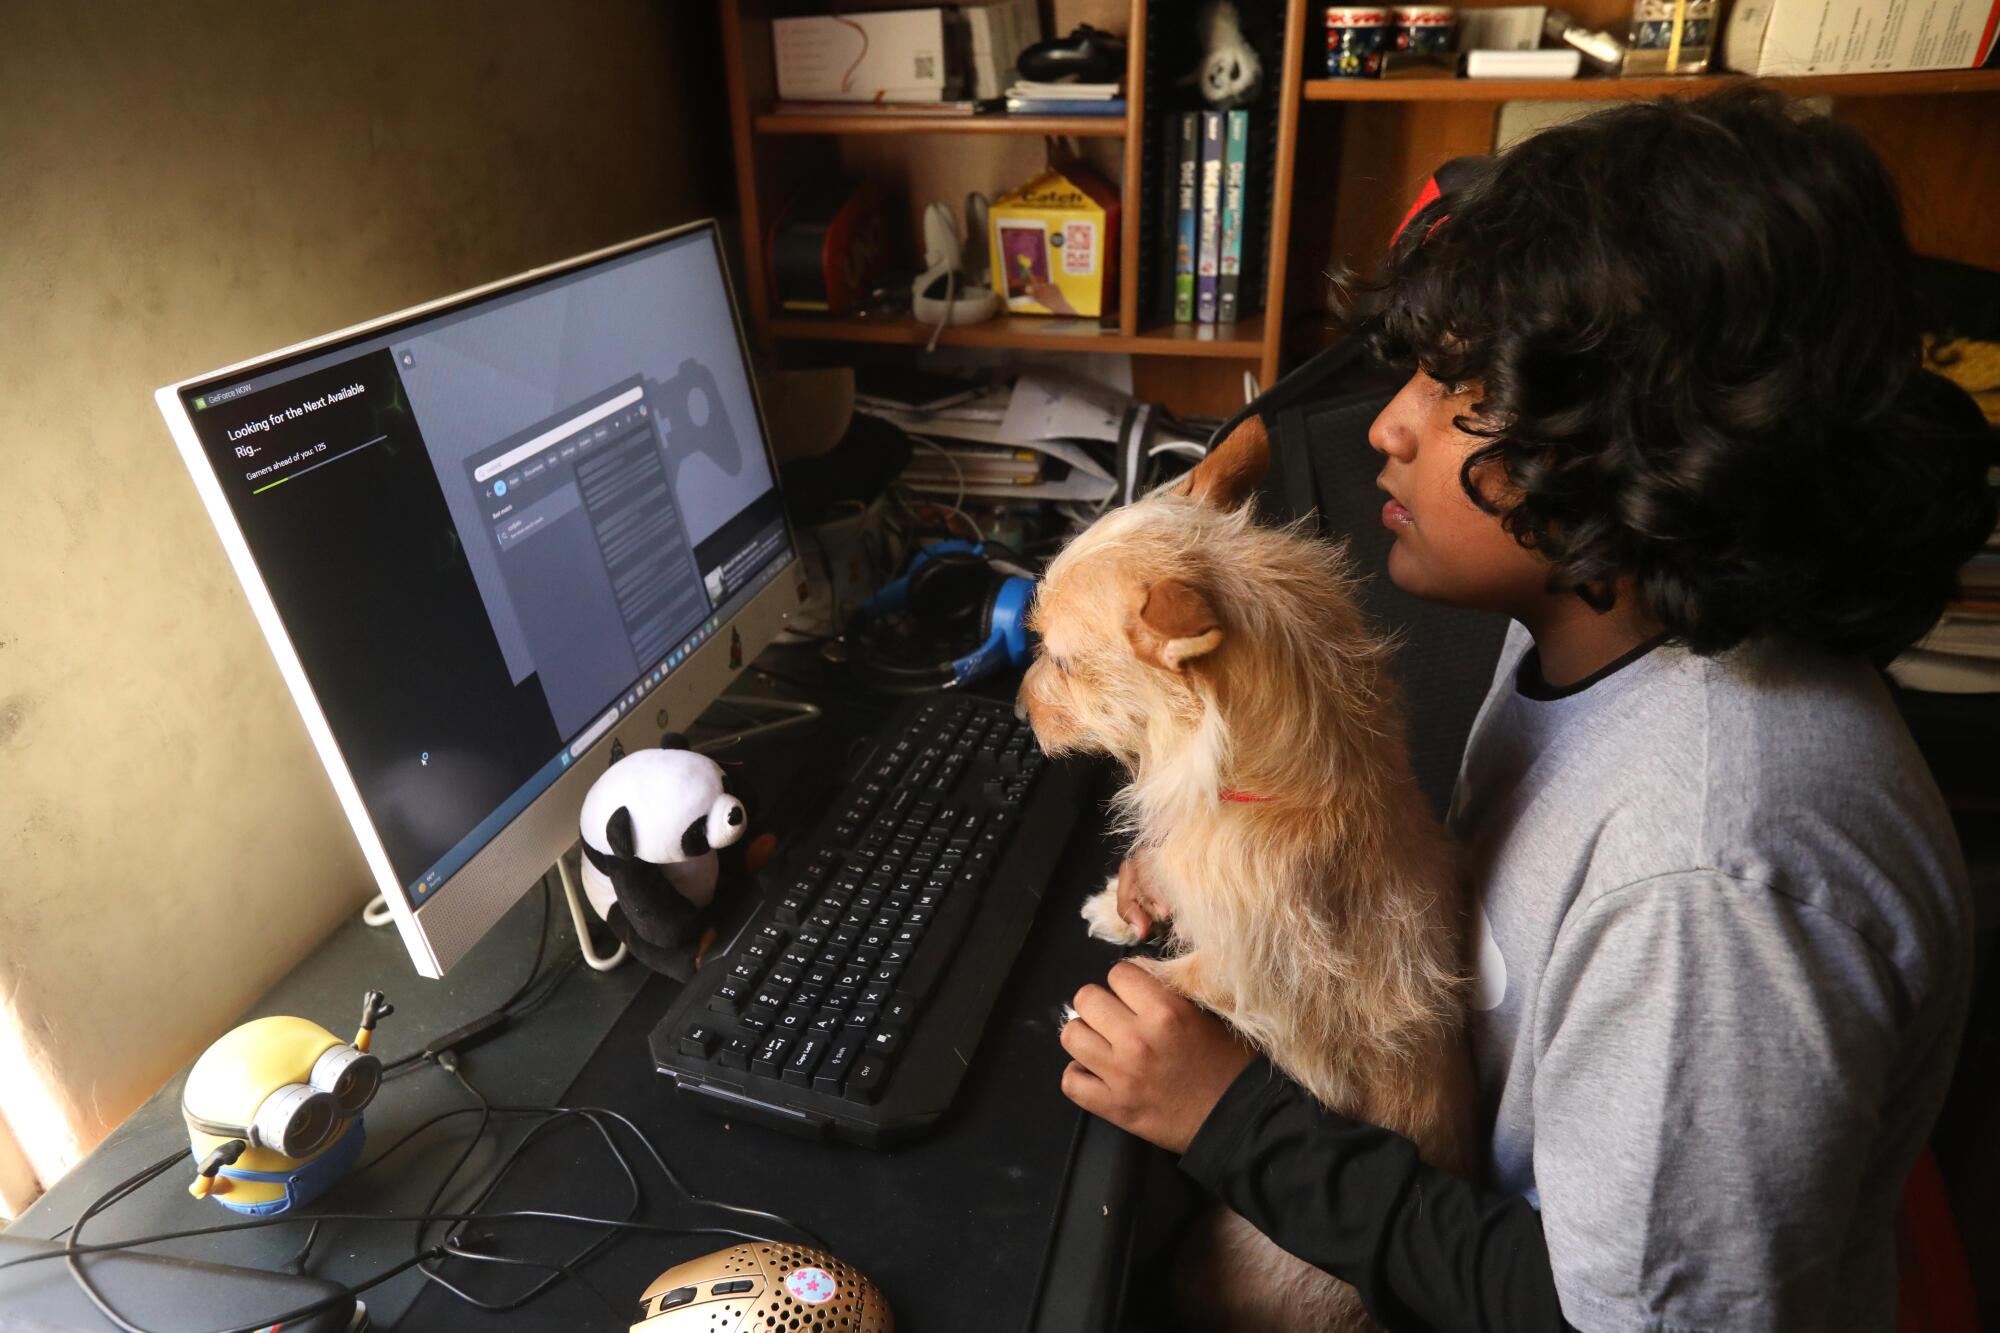 A boy holds a small dog in his lap as he works on a home computer.